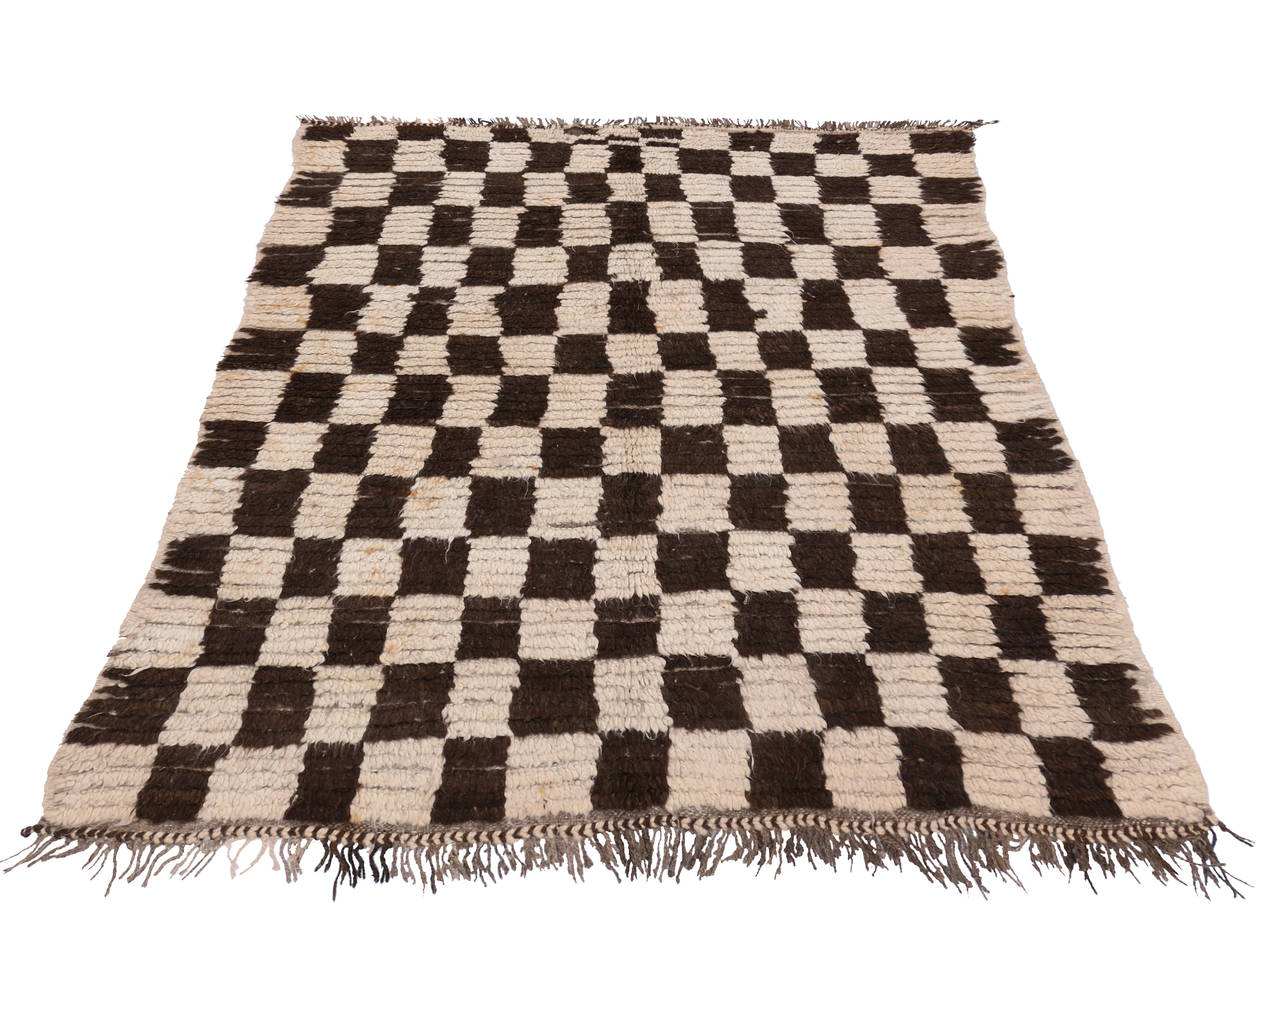 Wool Vintage Berber Moroccan Rug with Retro Checkerboard Design and Cubism Style